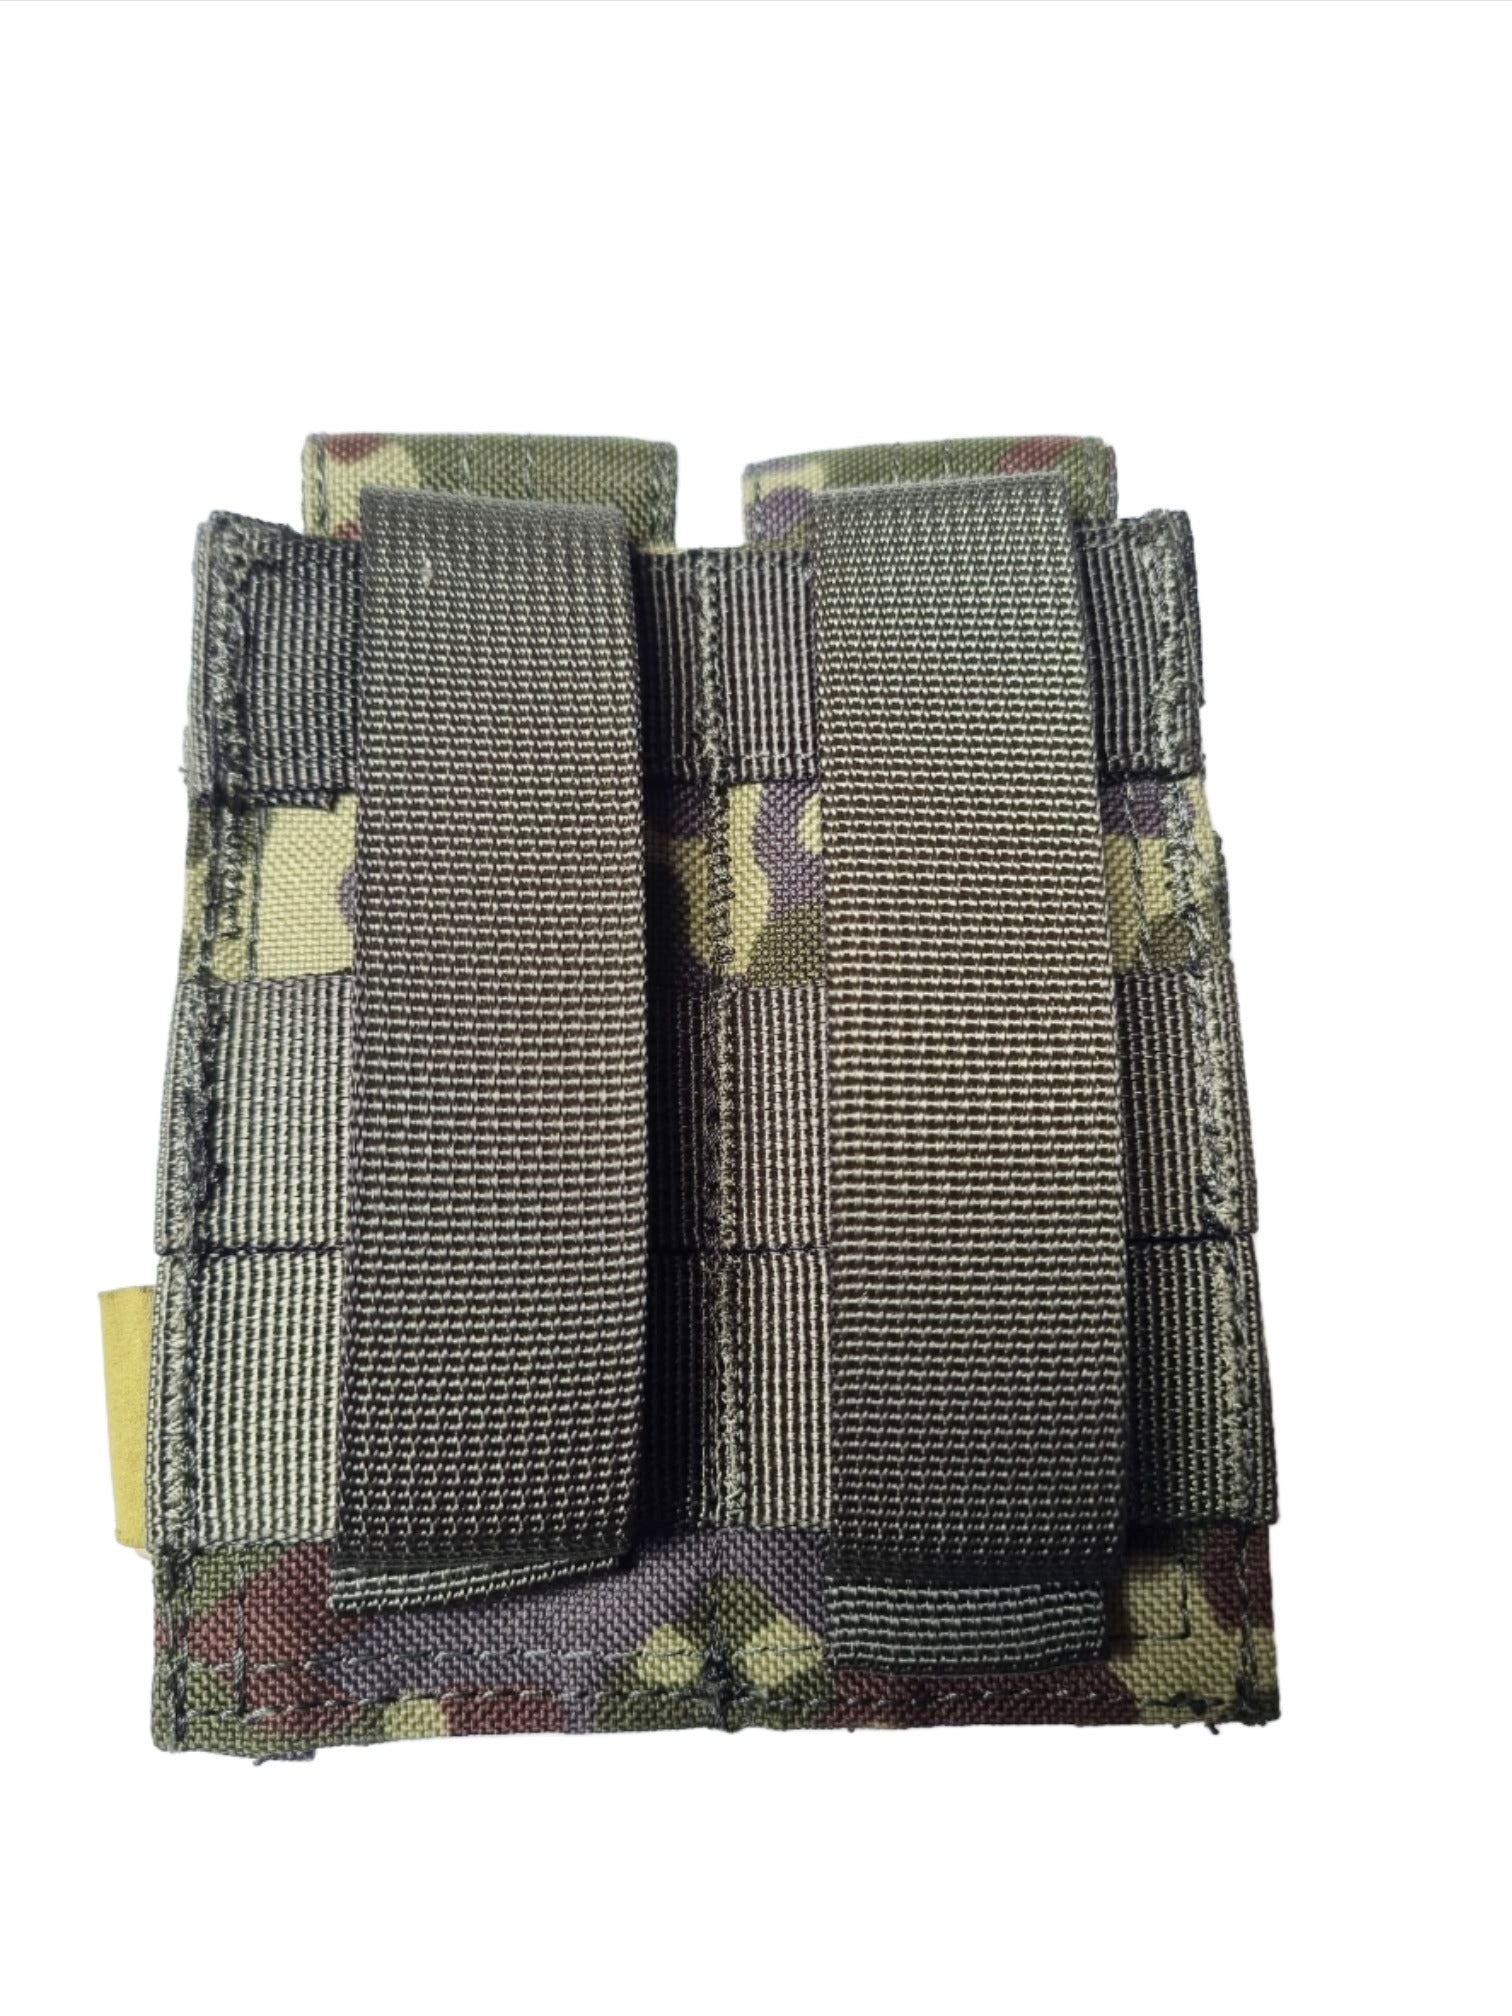 SHE-1065 Double Pistol Mag Pouch- GERMAN FLECTARN